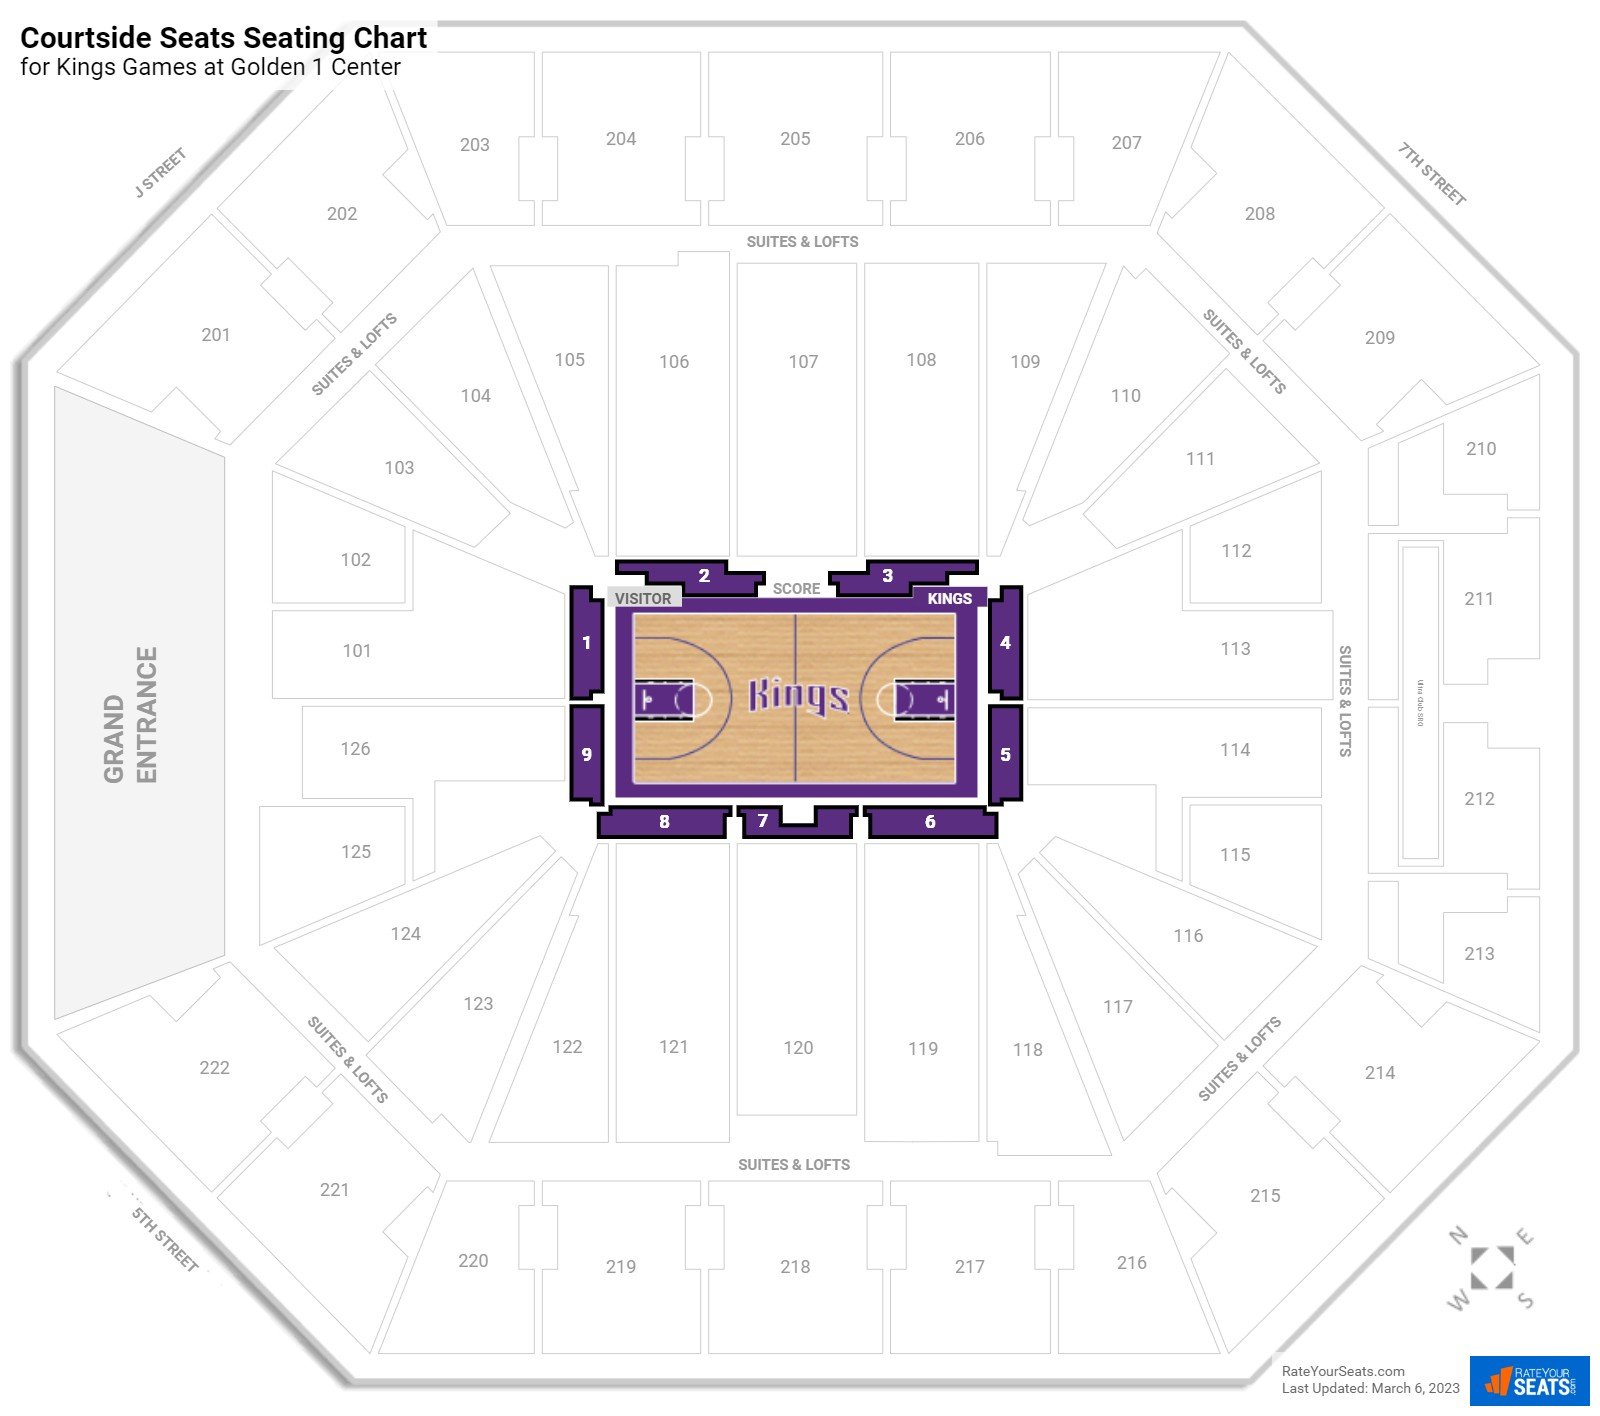 Kings Courtside Seats Seating Chart at Golden 1 Center